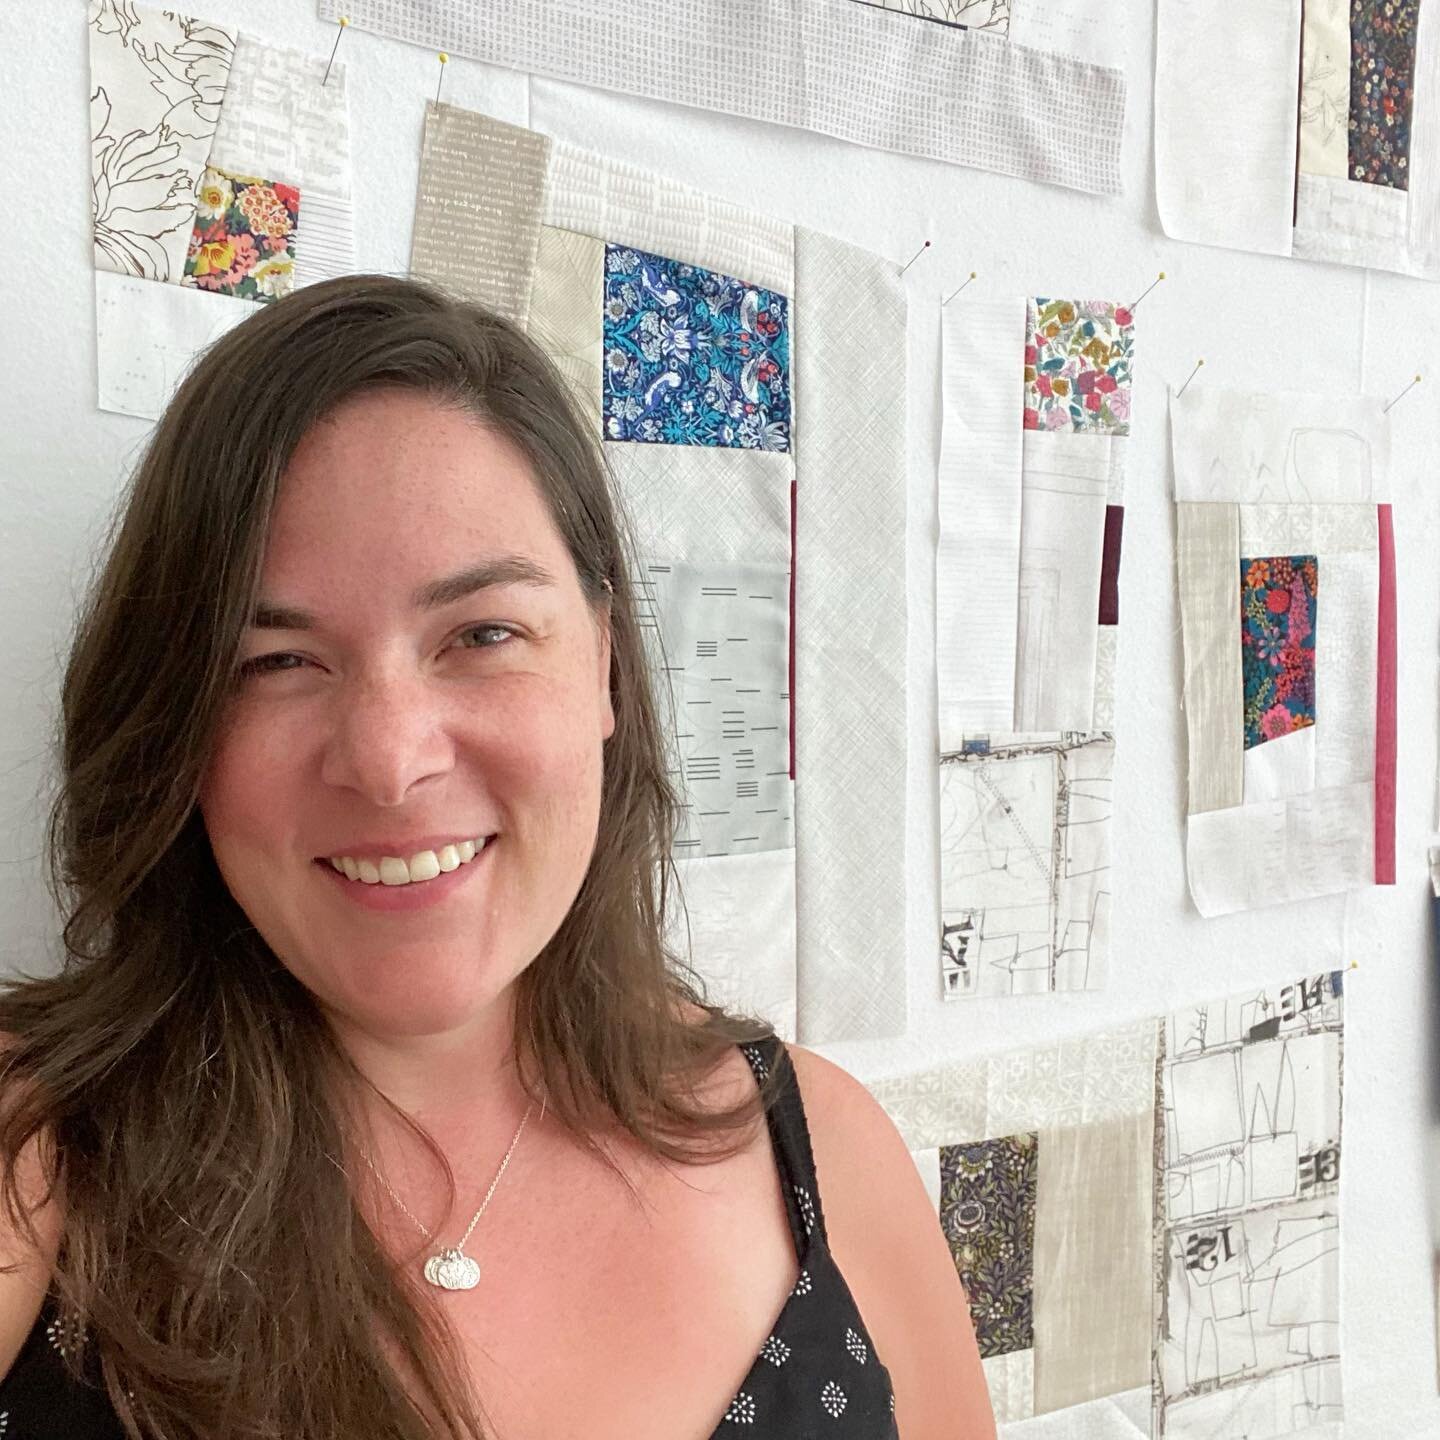 Spending so much time in Maine at @agatheringofstitches and with @nightquilter gave me so much perspective and confidence. I&rsquo;ve always avoided showing my face on here because as much as I want to encourage others to feel confidently themselves,